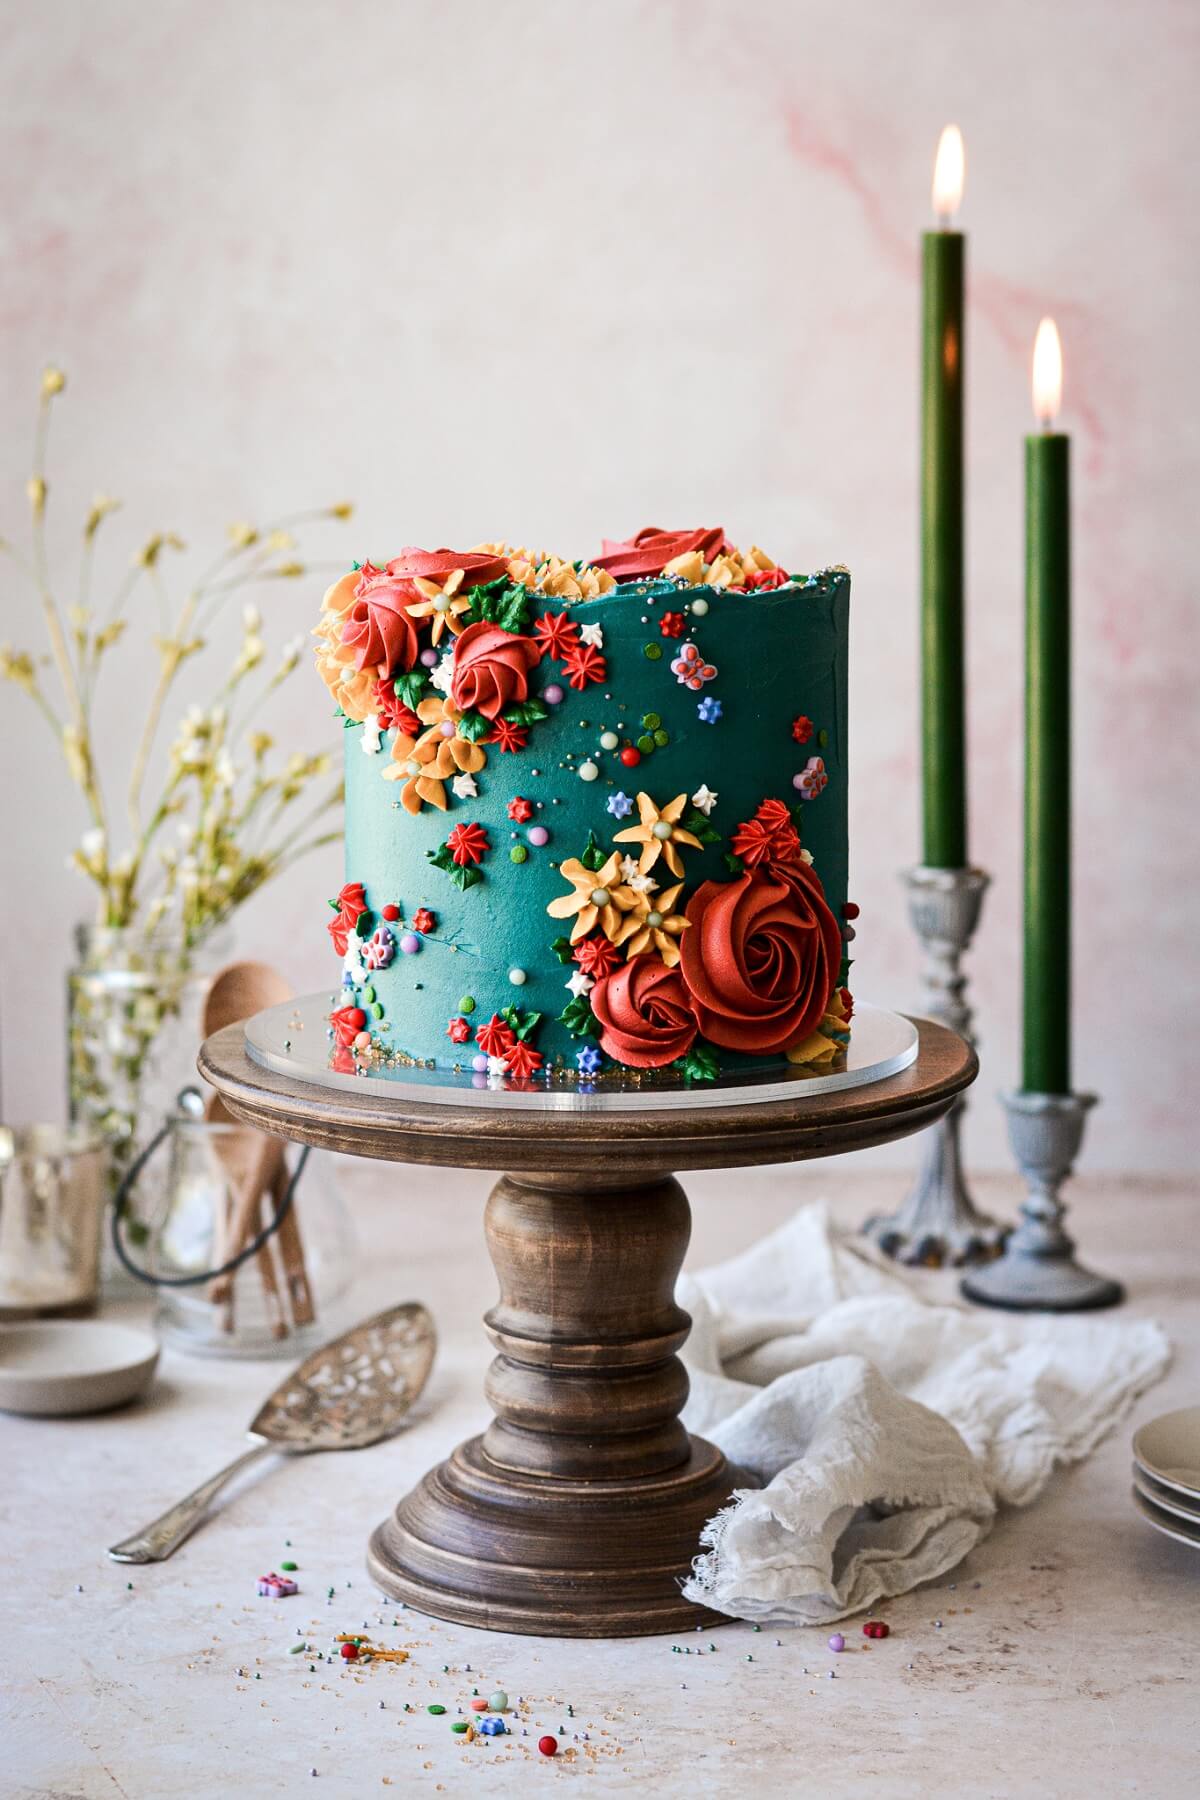 Chocolate Wedding Cakes: 26 Delicious Creations - hitched.co.uk -  hitched.co.uk